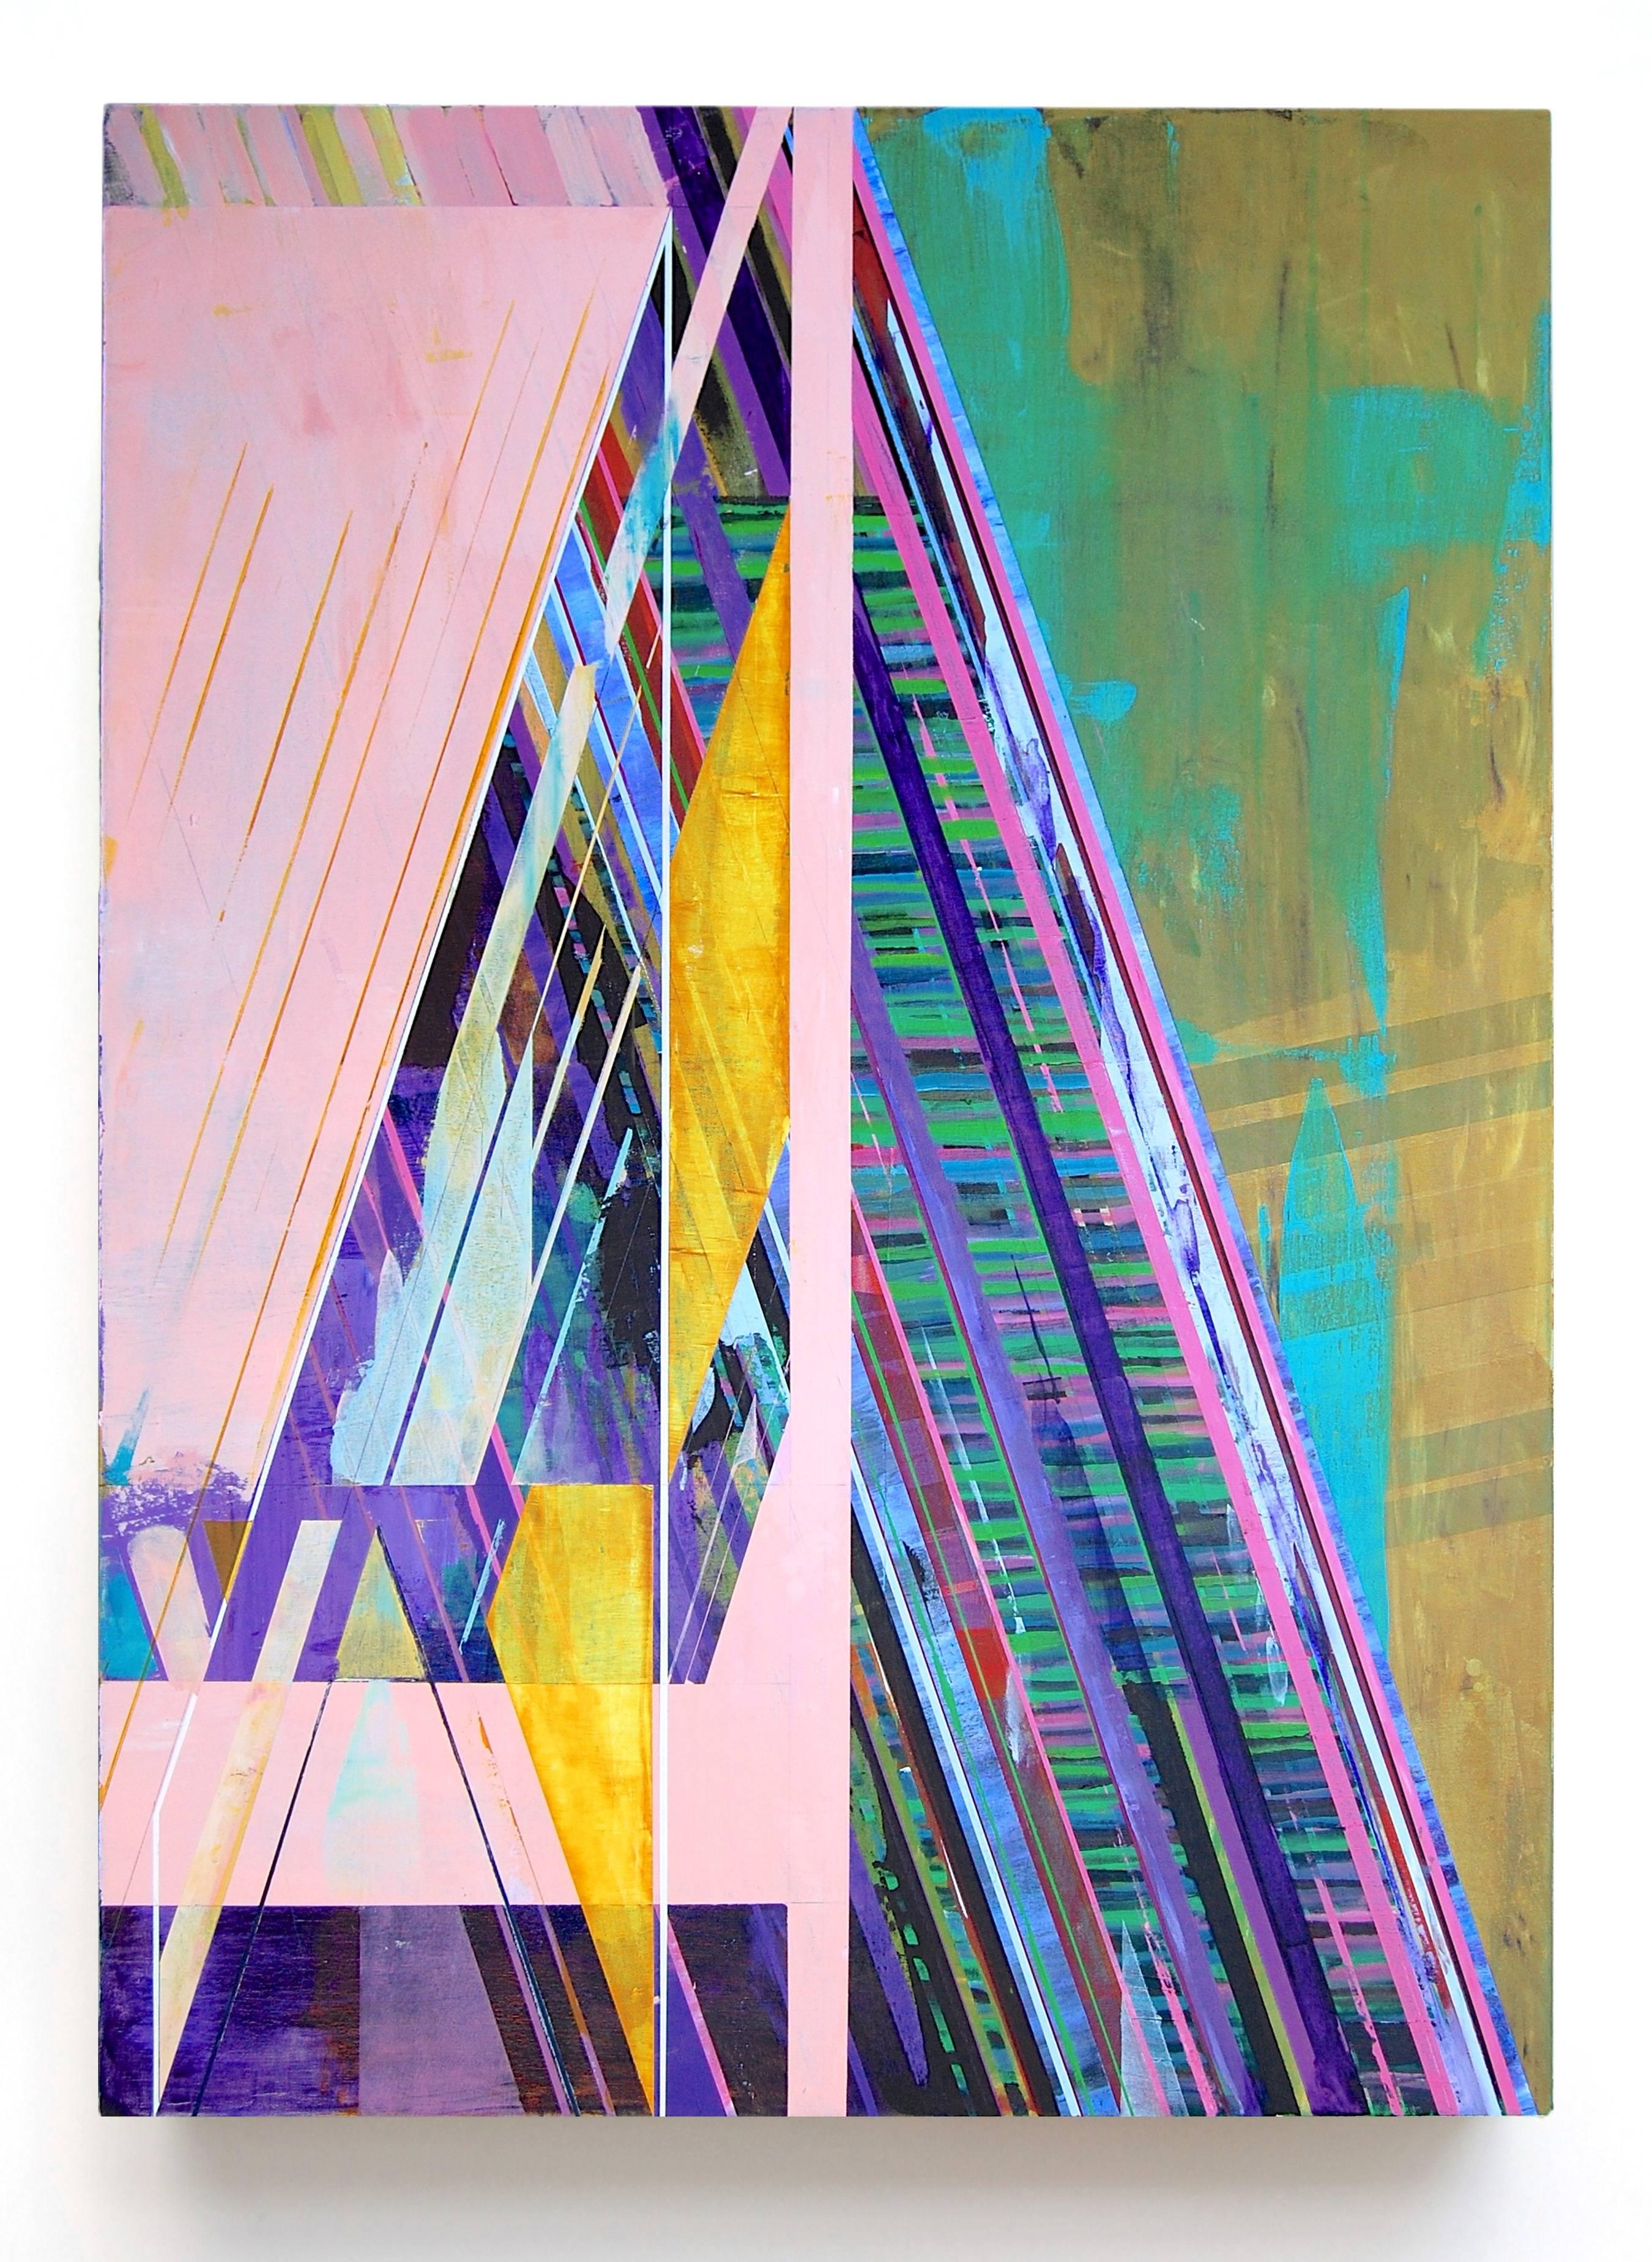 Joe lloyd, Ramp, 2016, acrylic on canvas, 42x30 inches is a predominantly pink geometric abstract painting with highlights of ochre, violet and turquoise. The hard edges of the geometric framework are complimented by the translucent layers of color